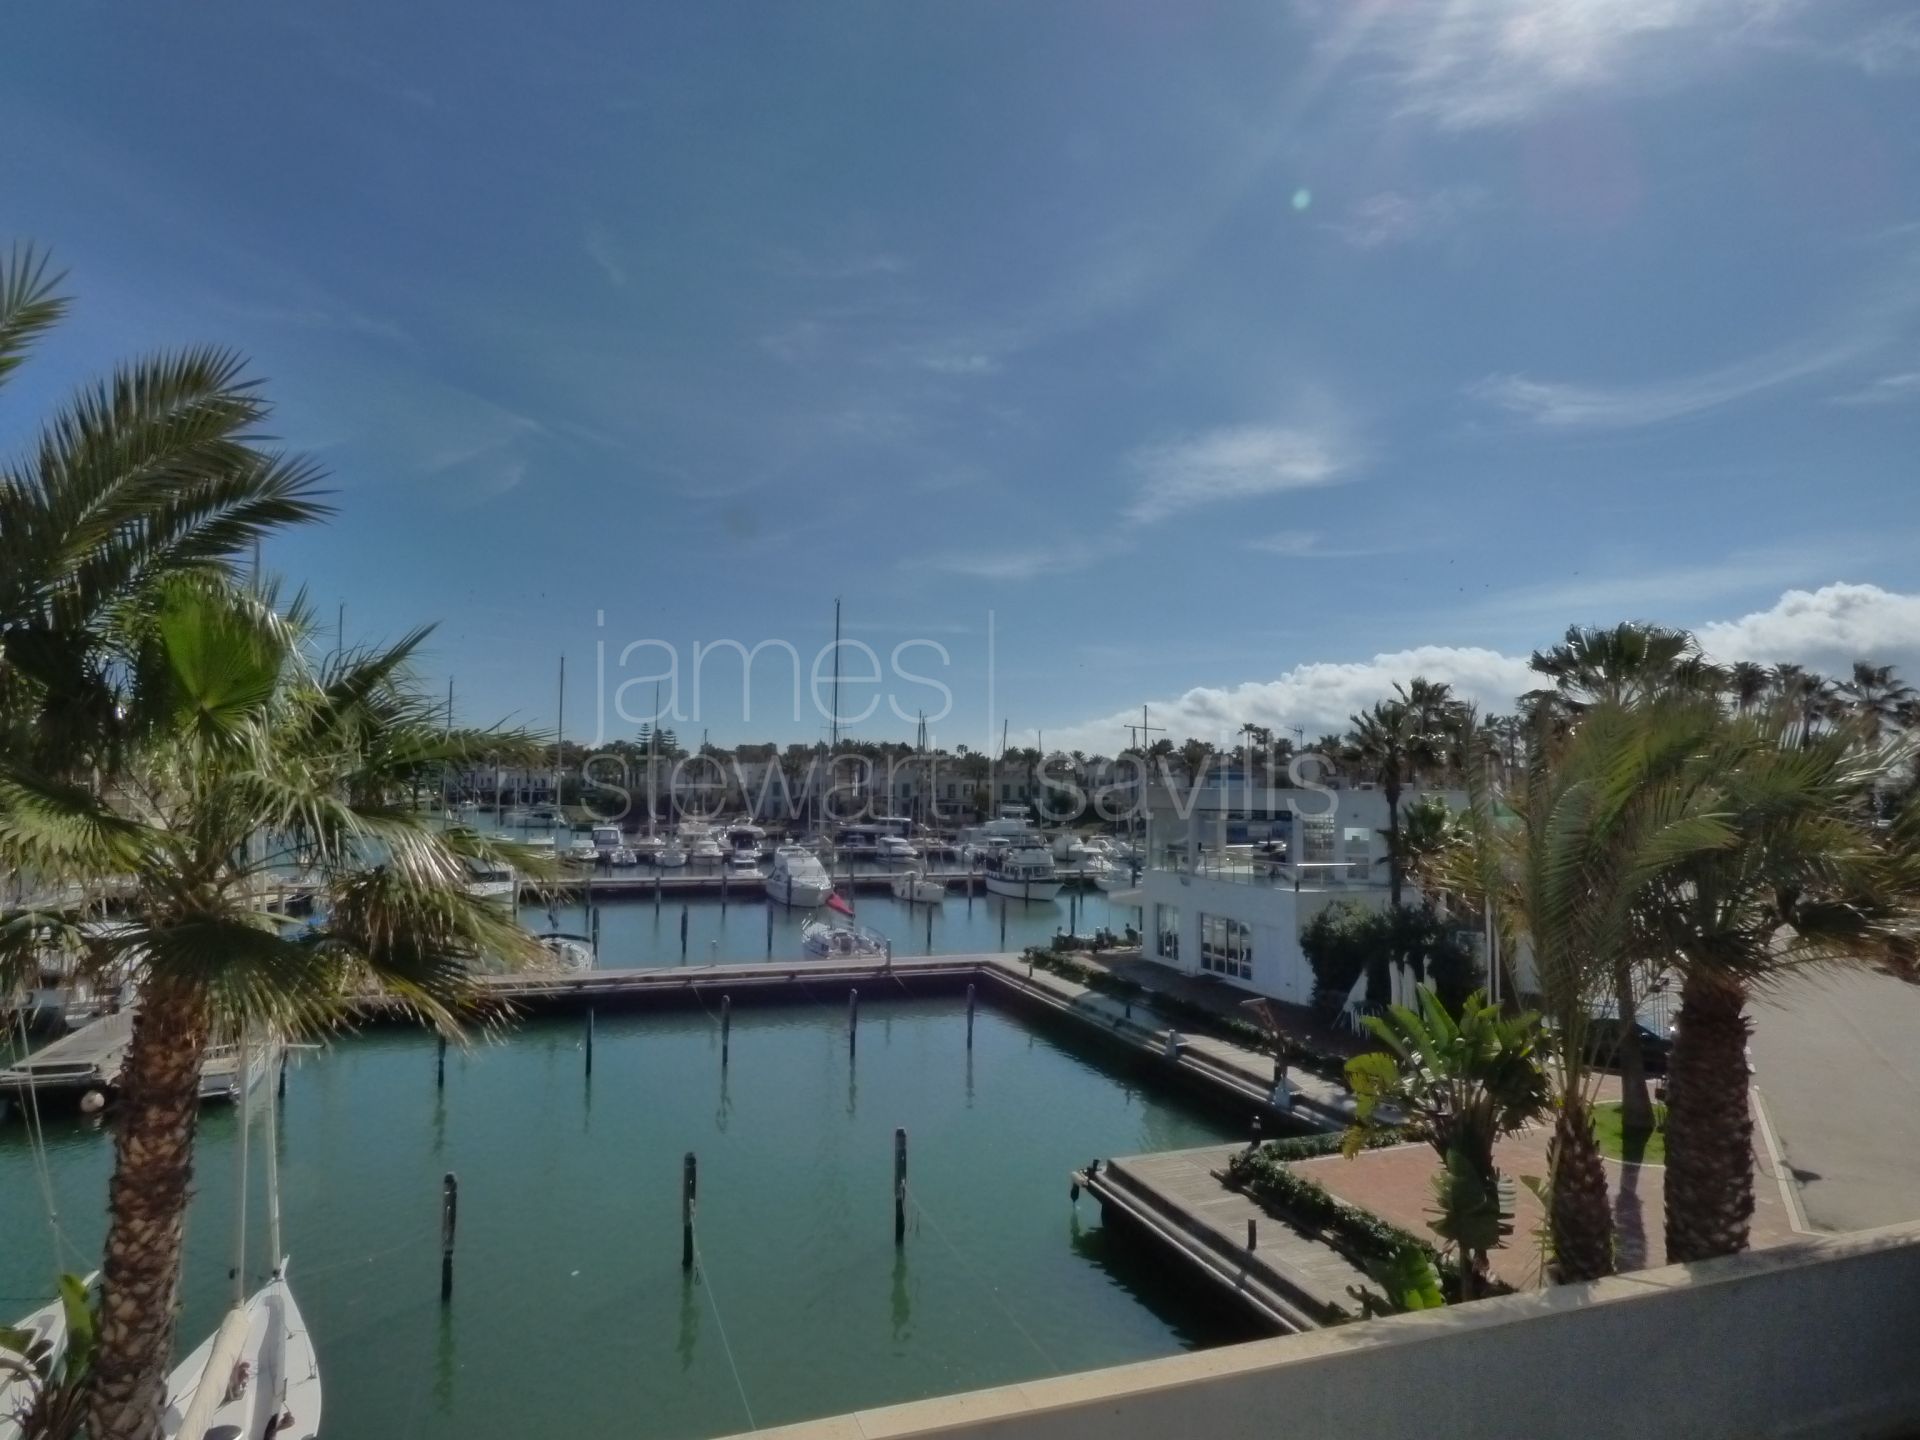 Bright and spacious 3-bedroom apartment with views of the Sotogrande Marina.